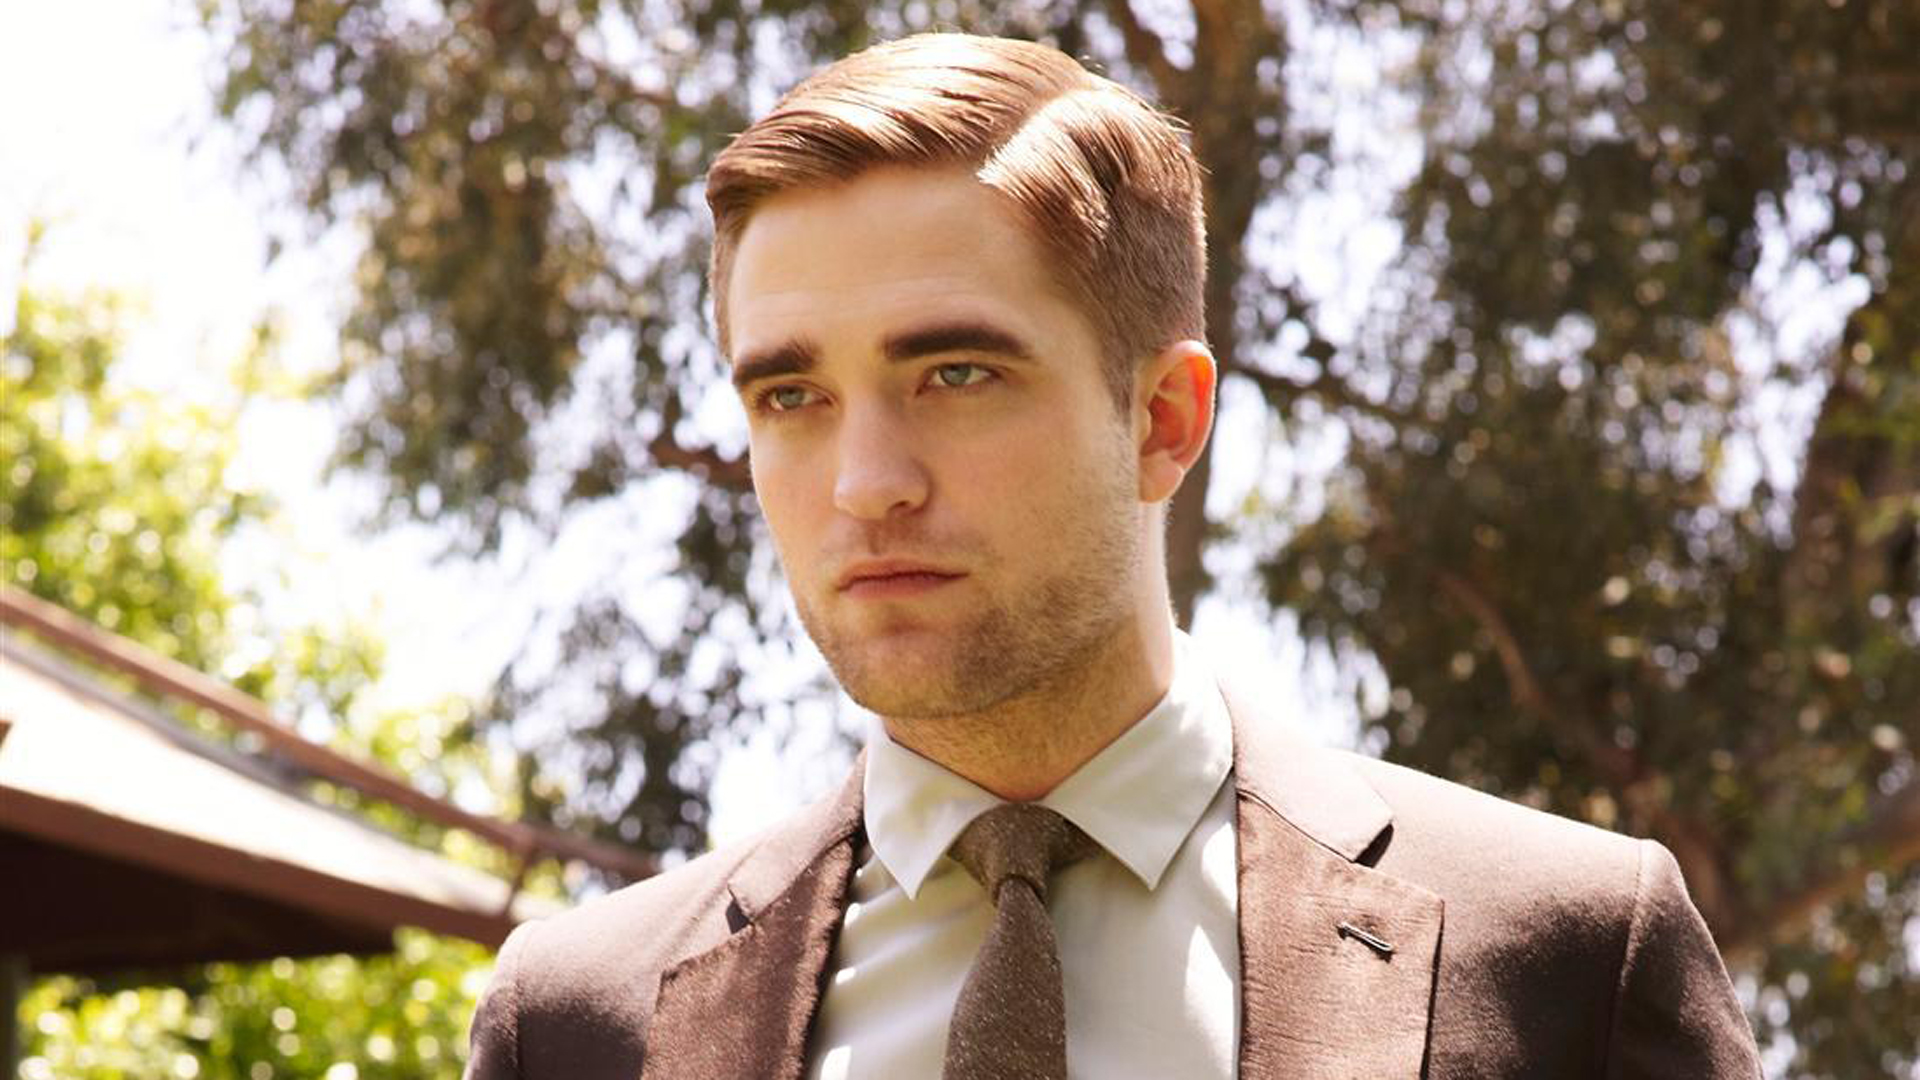 robert pattinson hd wallpapers,hair,forehead,hairstyle,suit,chin